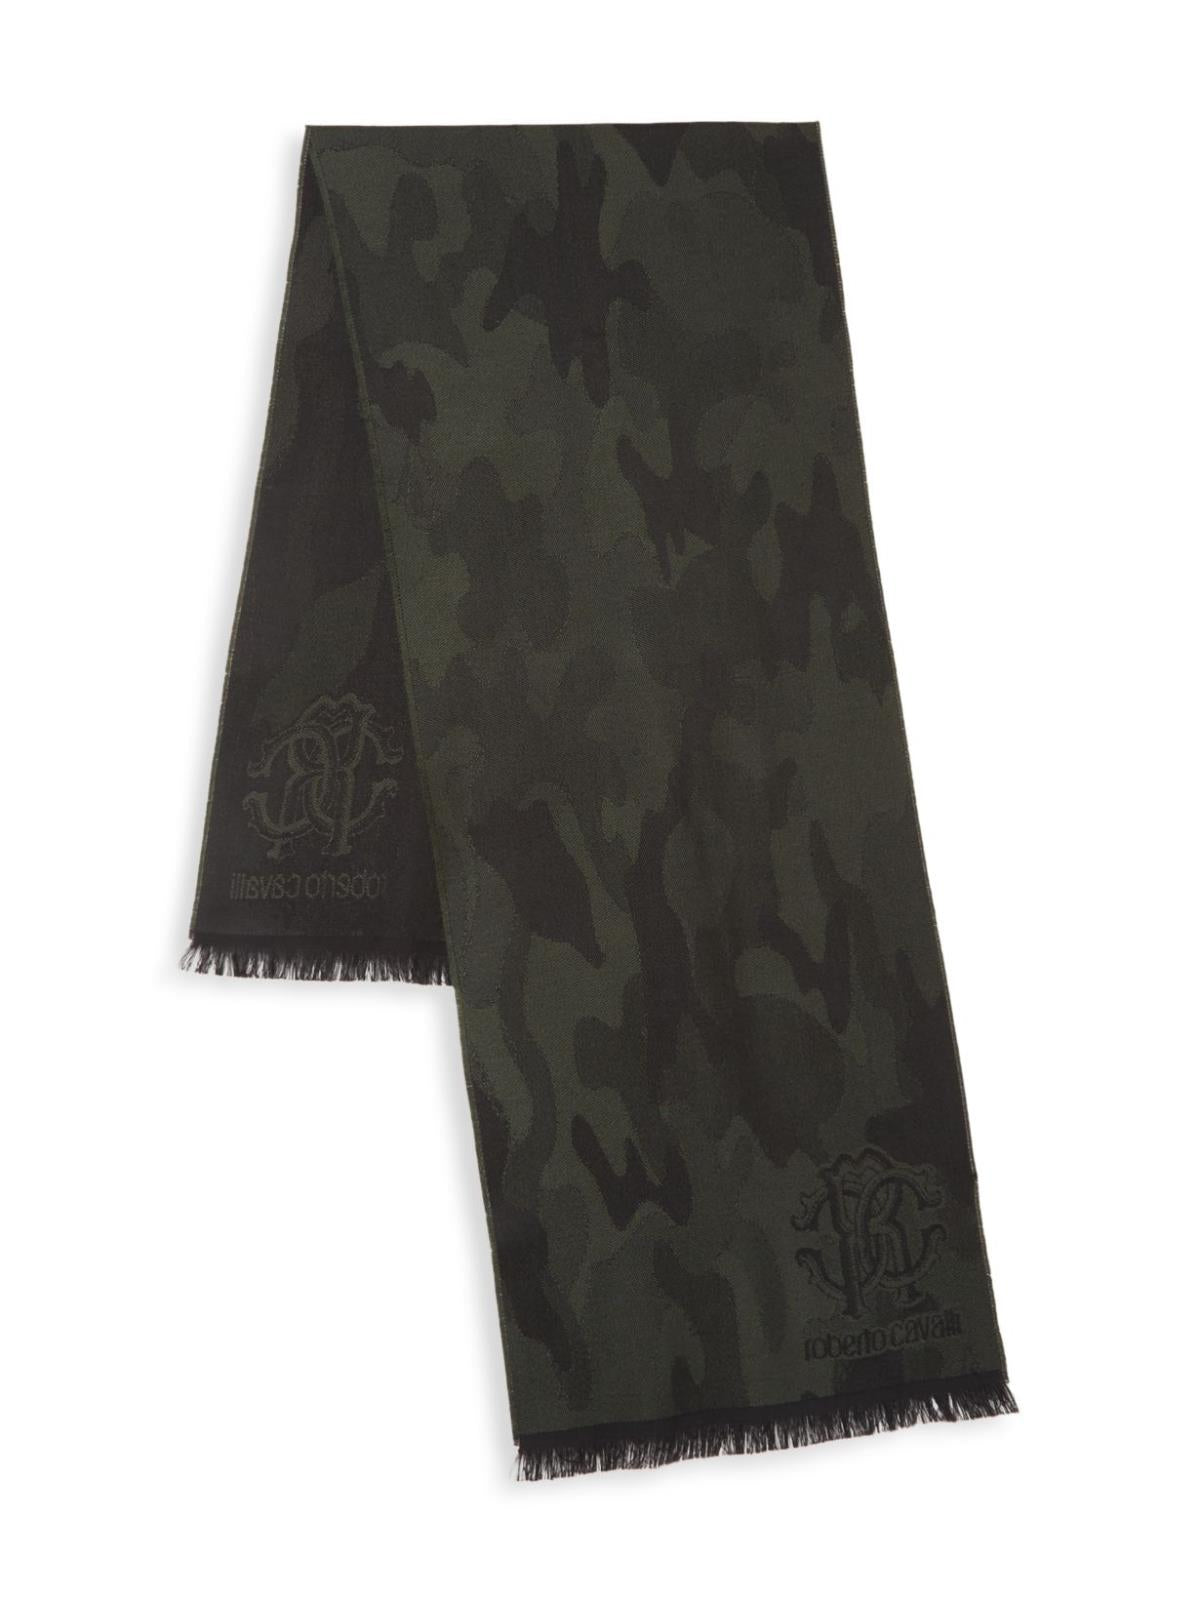 NWT $285 Roberto Cavalli Wool-Blend Camo Olive Scarf Made in Italy